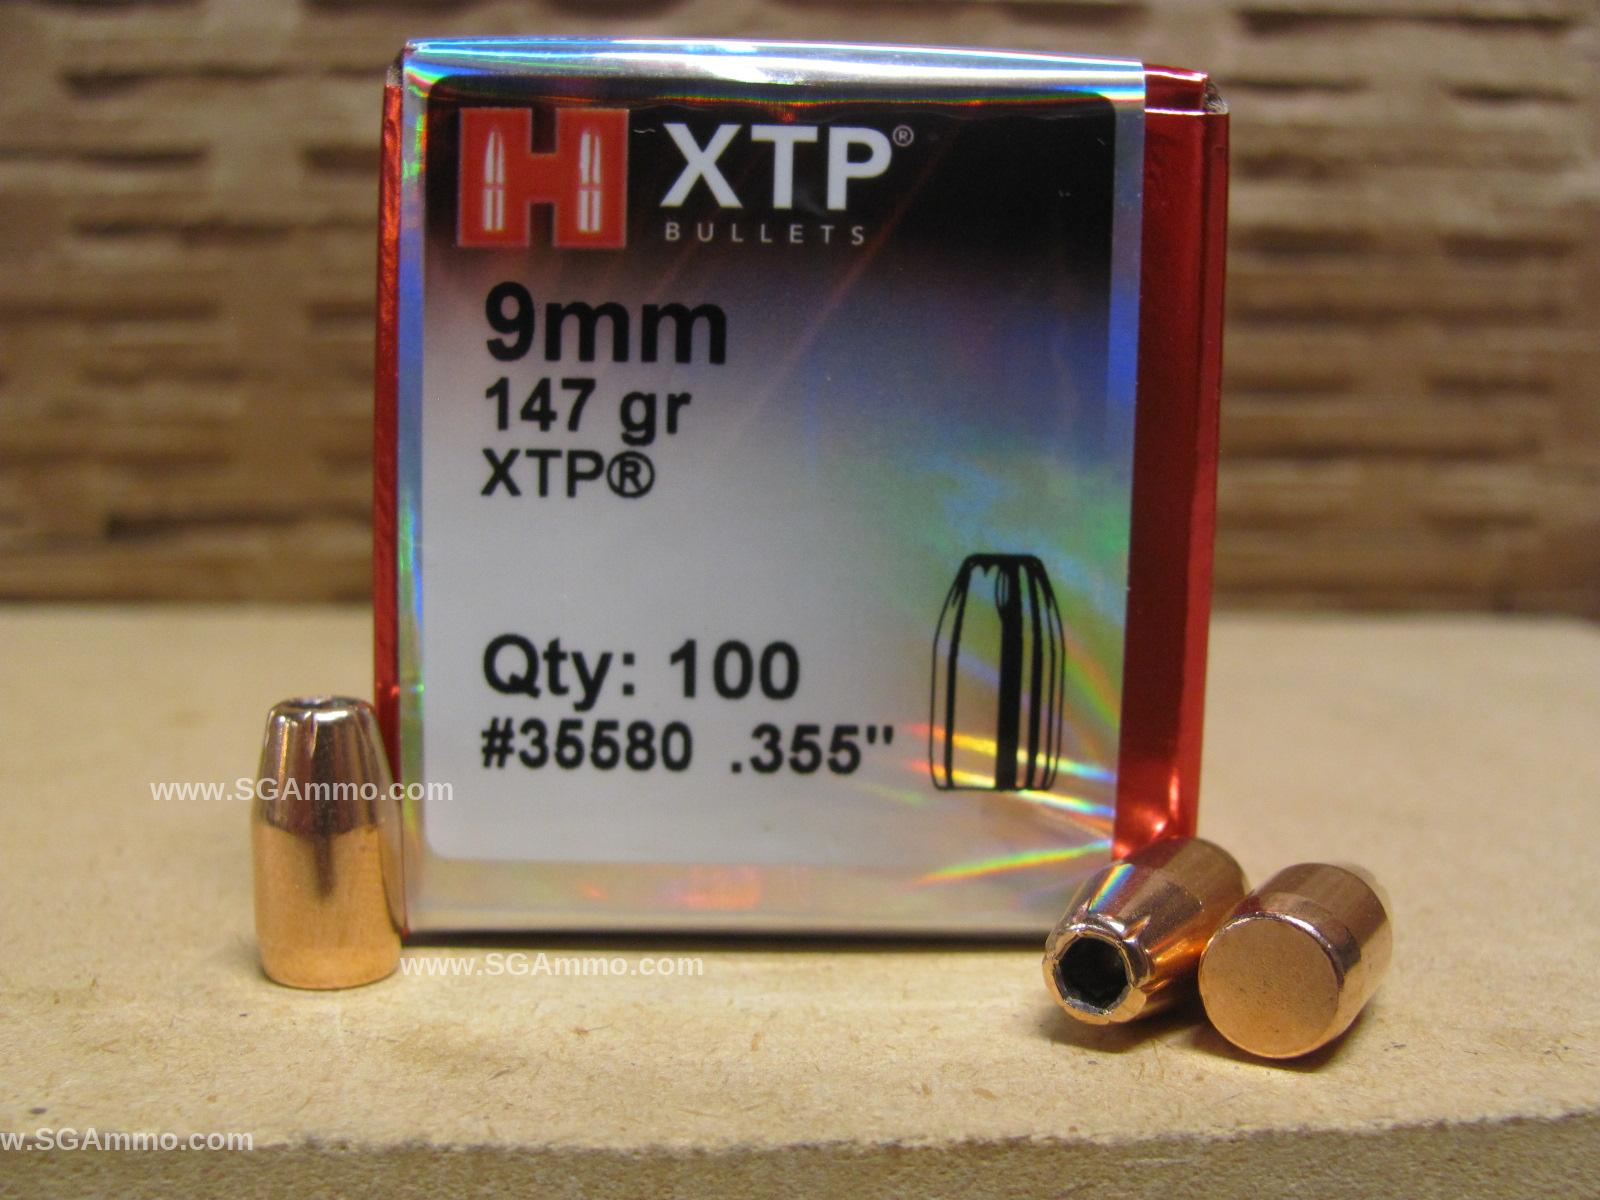 100 Count Box - 9mm 147 Grain XTP Projectile For Handloading .355